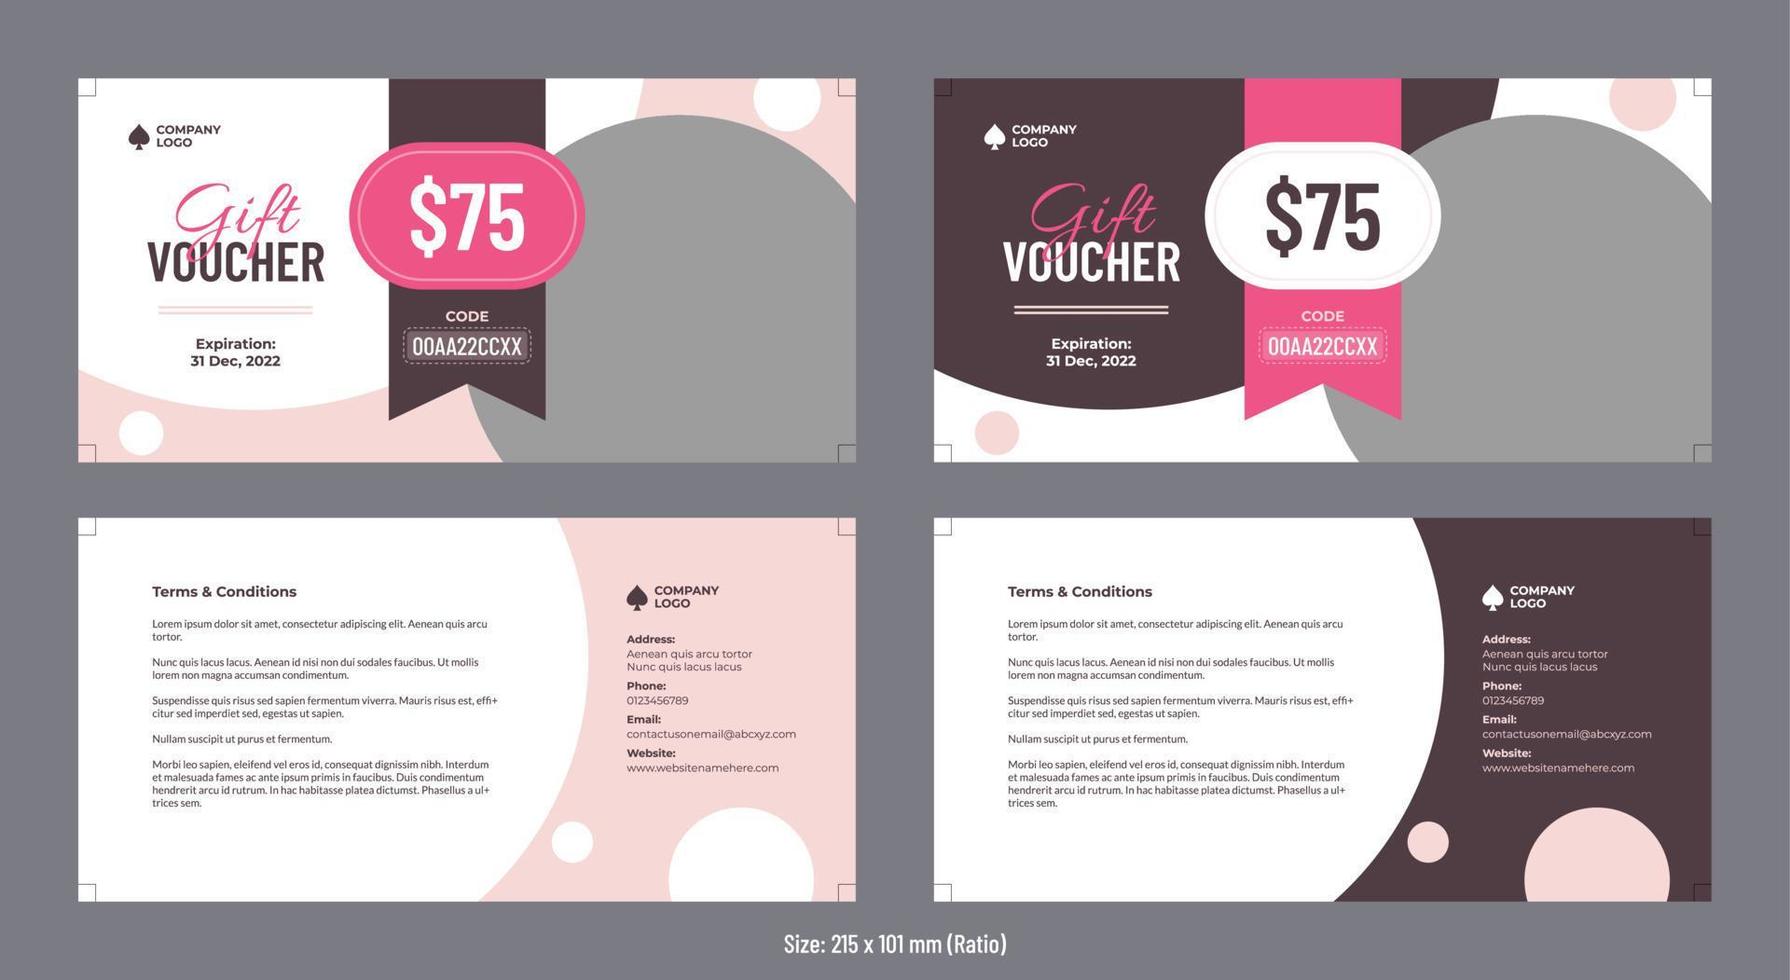 Gift voucher vector design template with image, Coupon or reward background design.